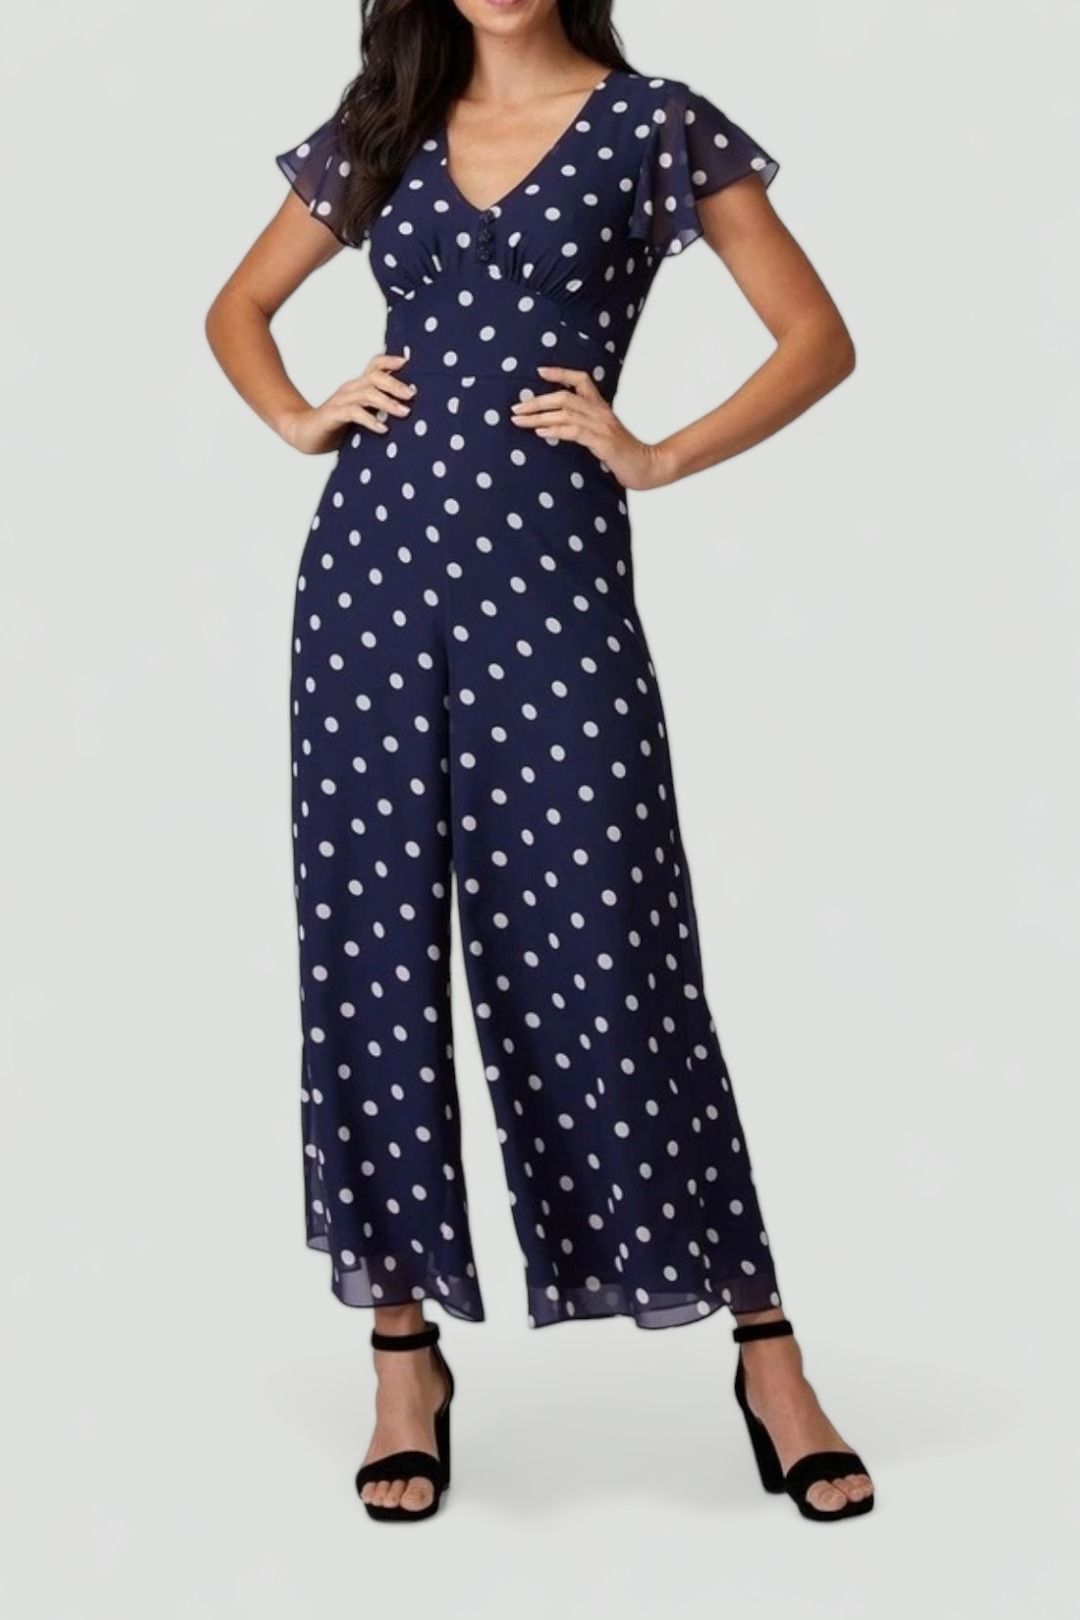 Alannah Hill	Out of Sight Polka Dot Jumpsuit in Navy